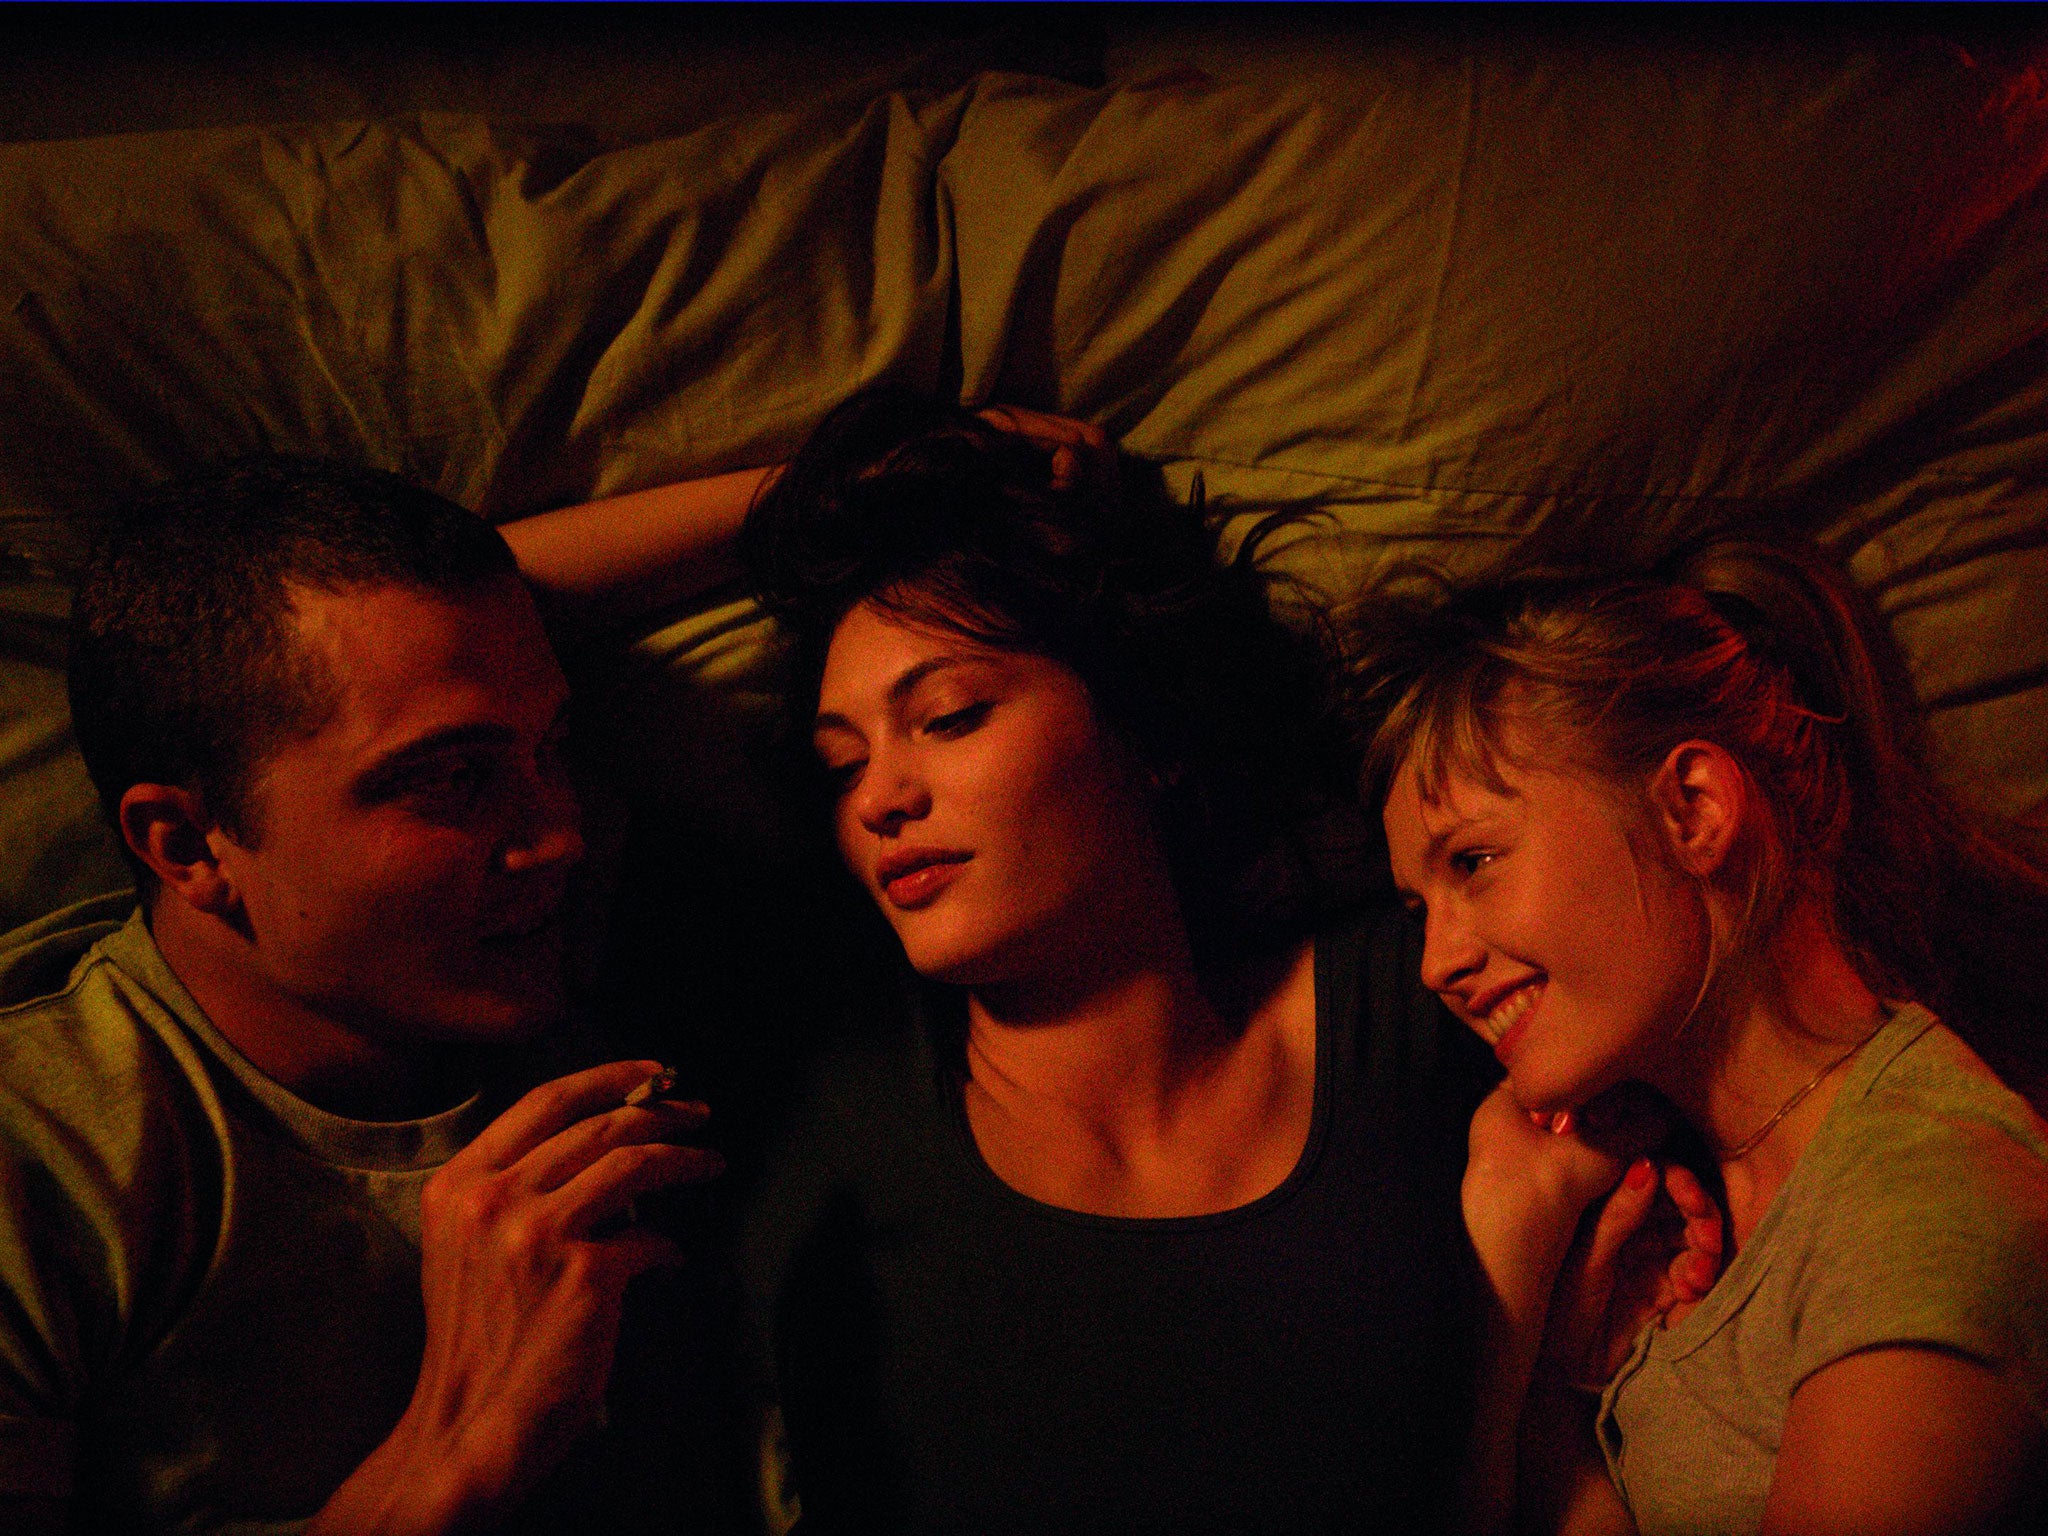 The most erotic scene in Love is one involving all three protagonists